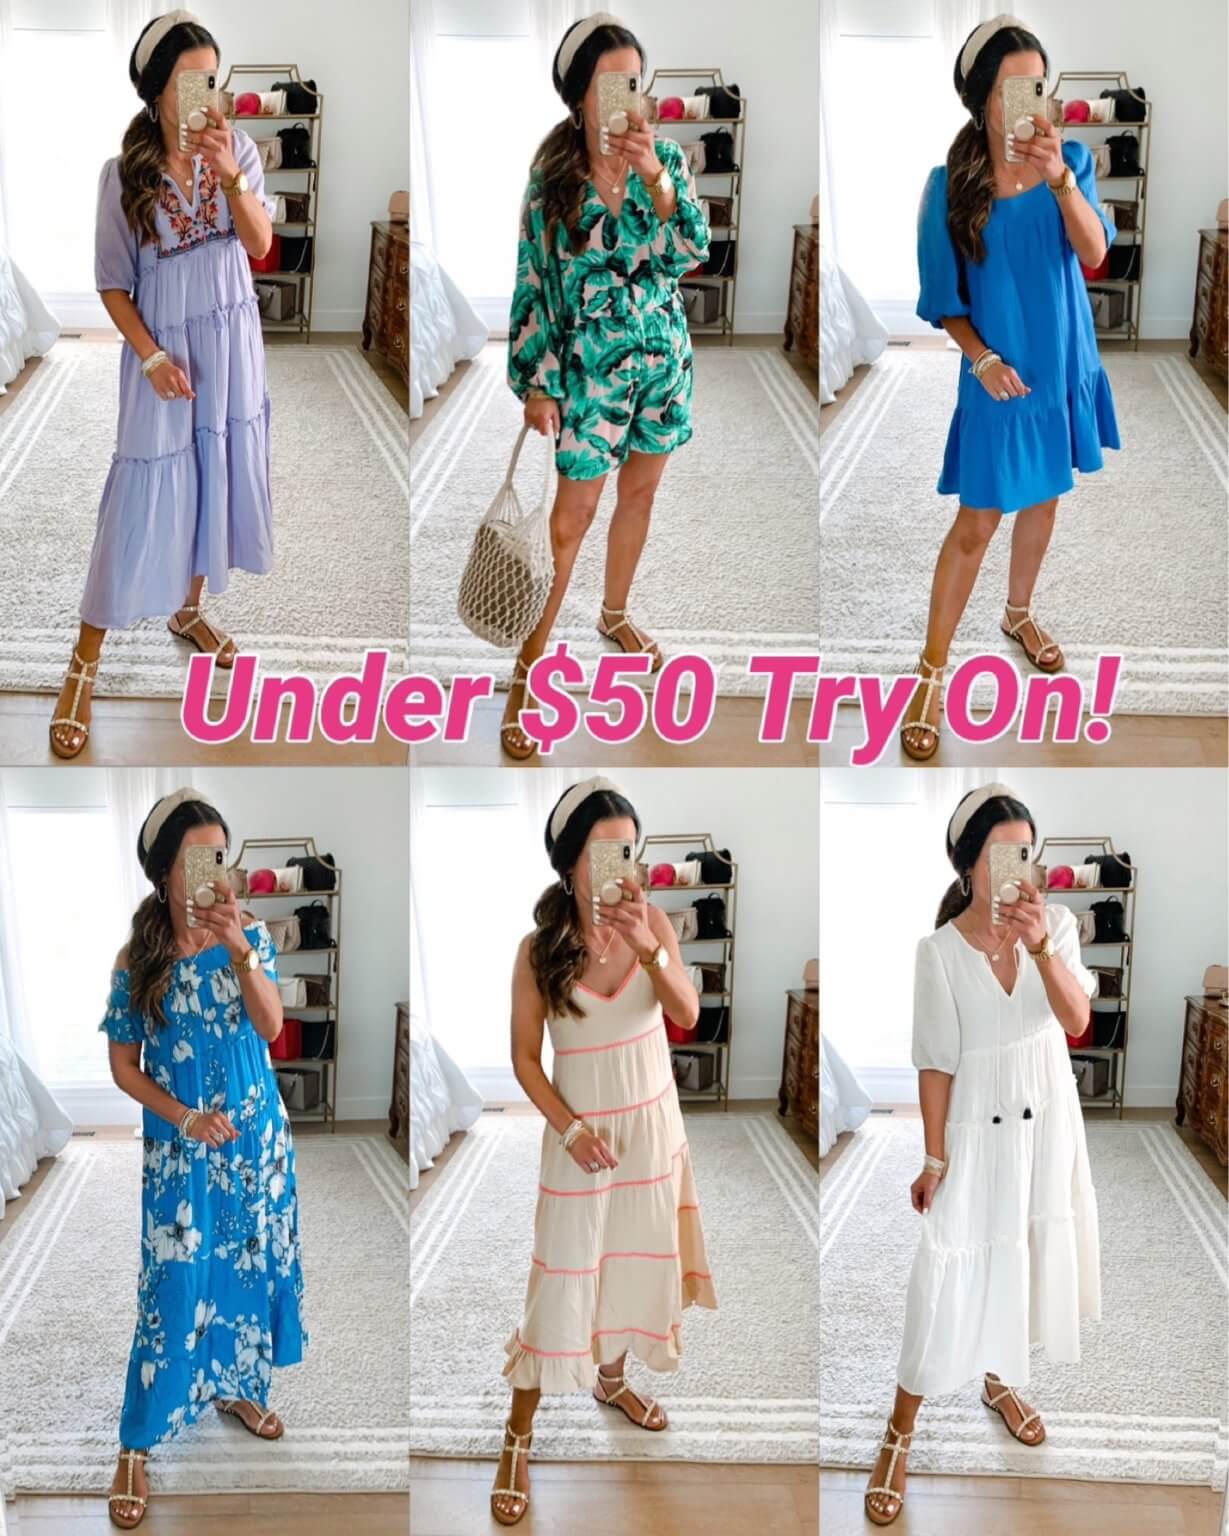 New Summer Try On Under $50 - The Double Take Girls